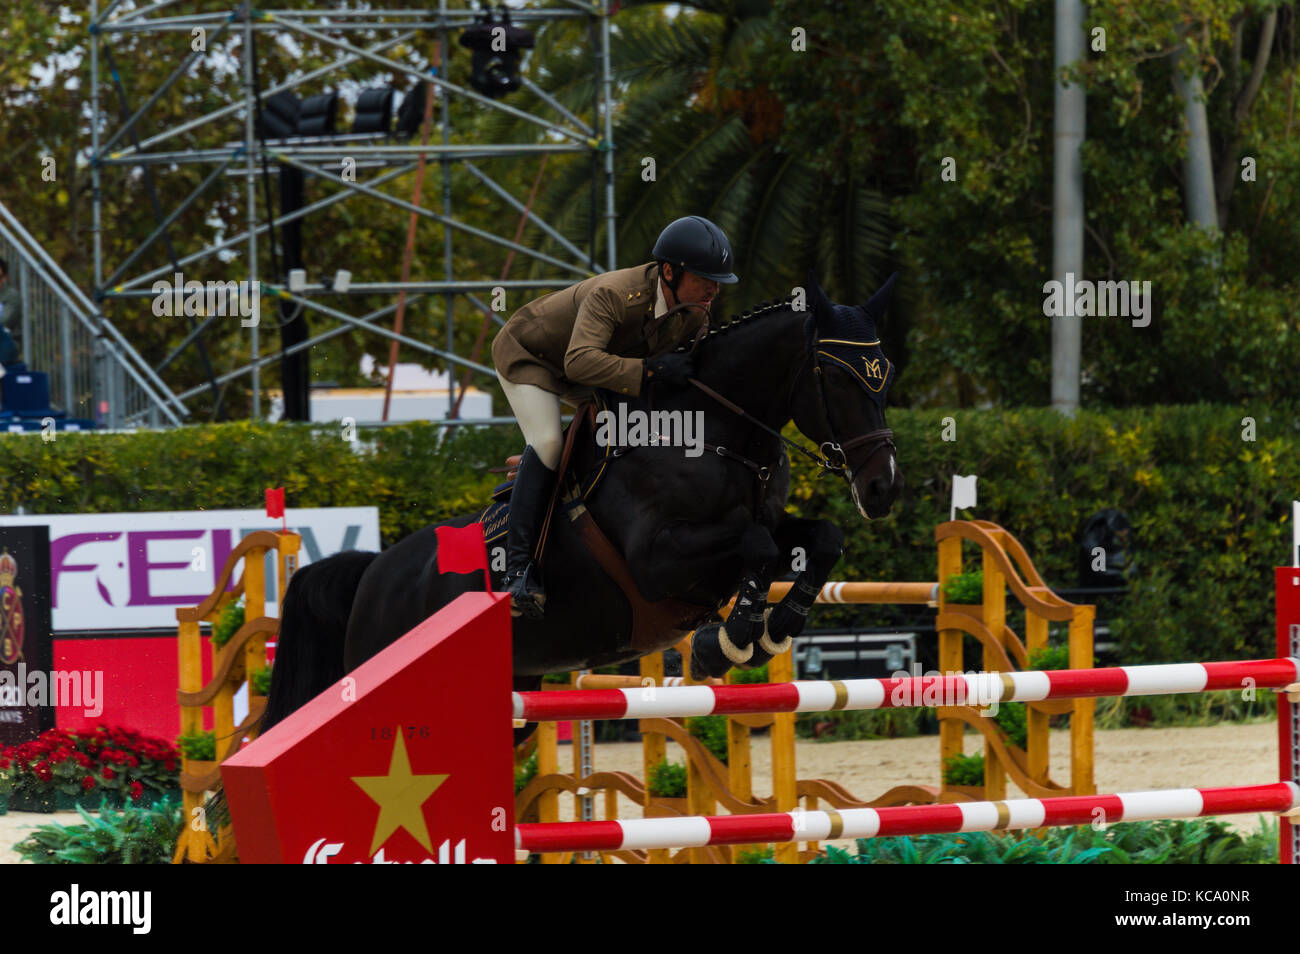 Longines FEI Nations Cup jumping Final, Barcelona Stockfoto